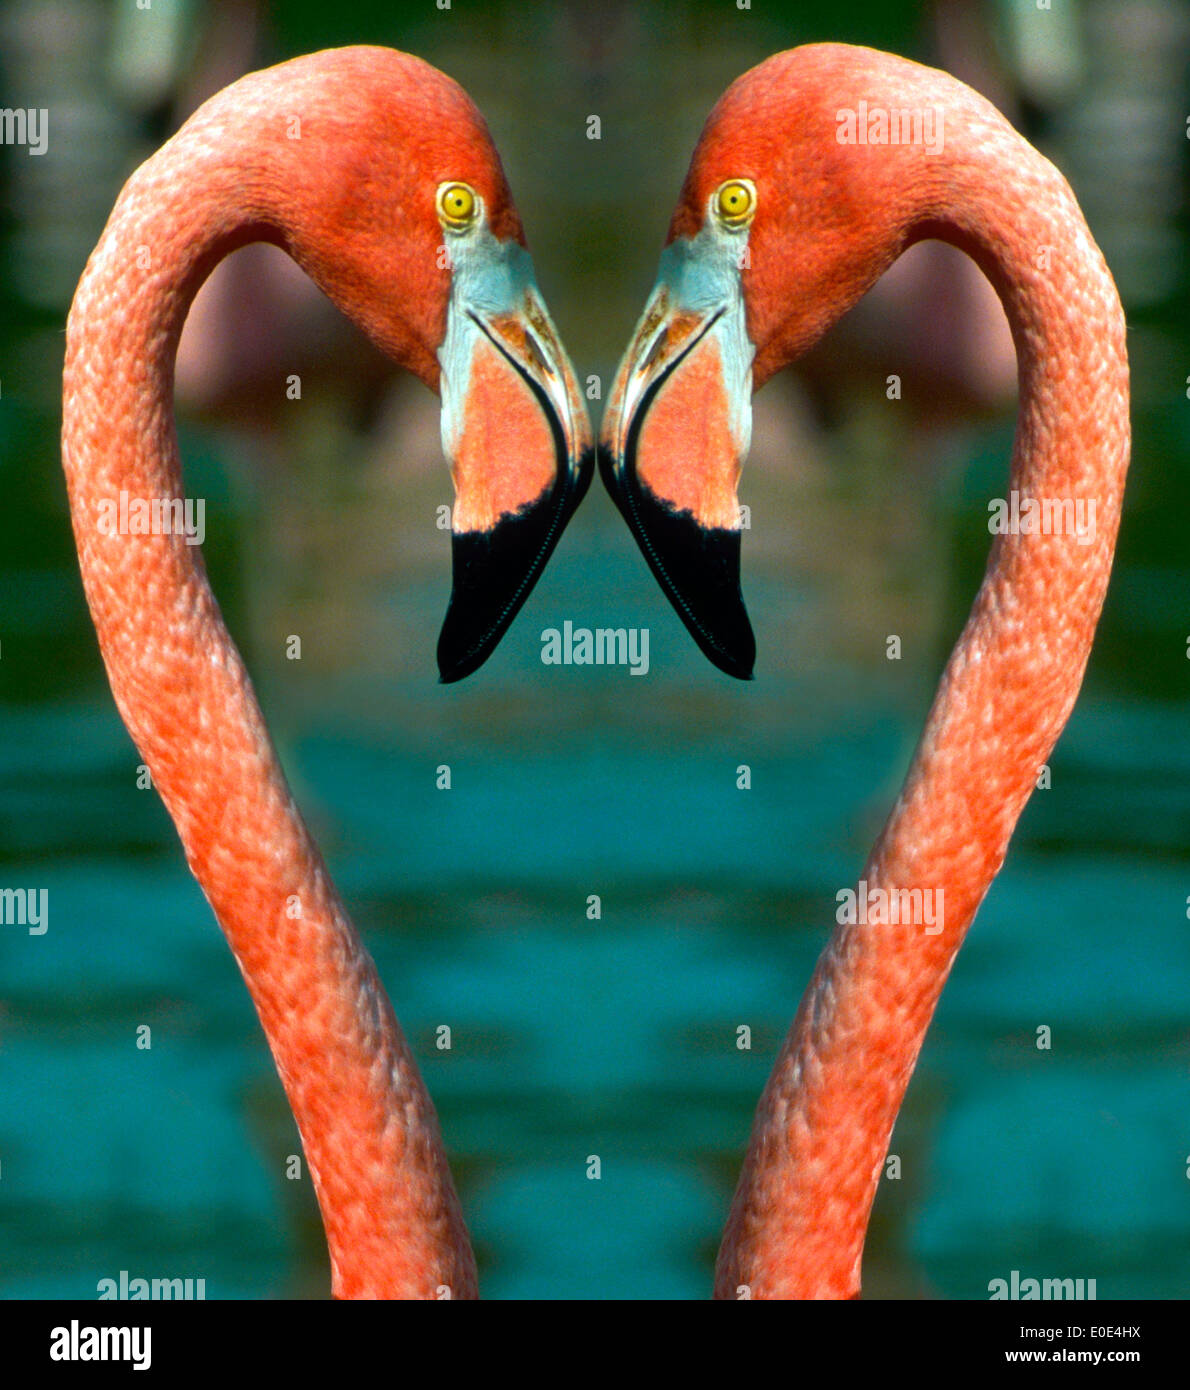 Two flamingos make the perfect Love Birds as they form the shape of a heart with their distinctive heads and necks in this digitally-altered image. Stock Photo